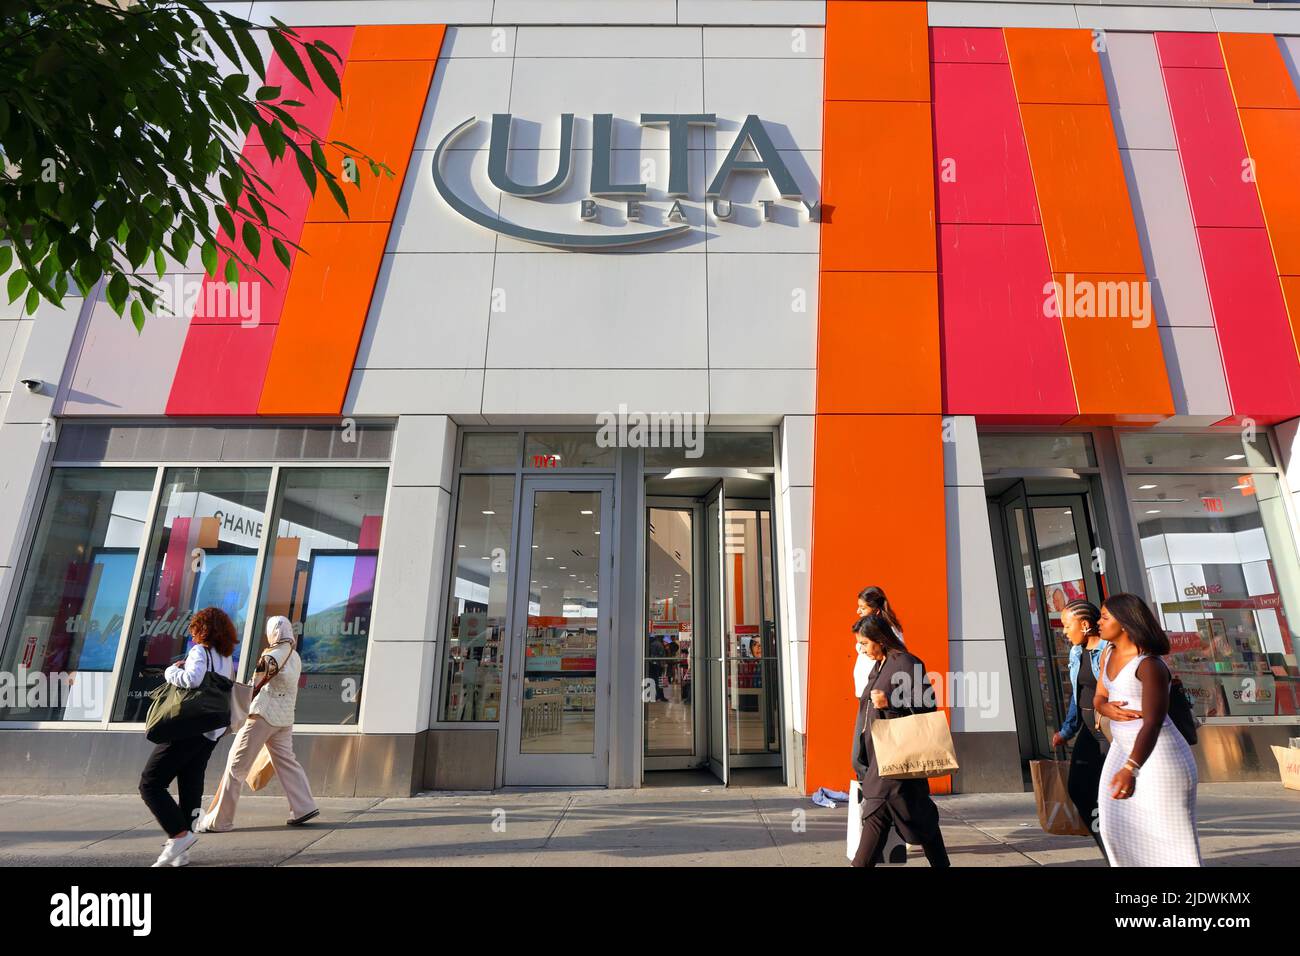 Ulta Beauty, 51 W 34th St., New York, NYC storefront photo of a cosmetics store in Herald Square in Manhattan. Stock Photo